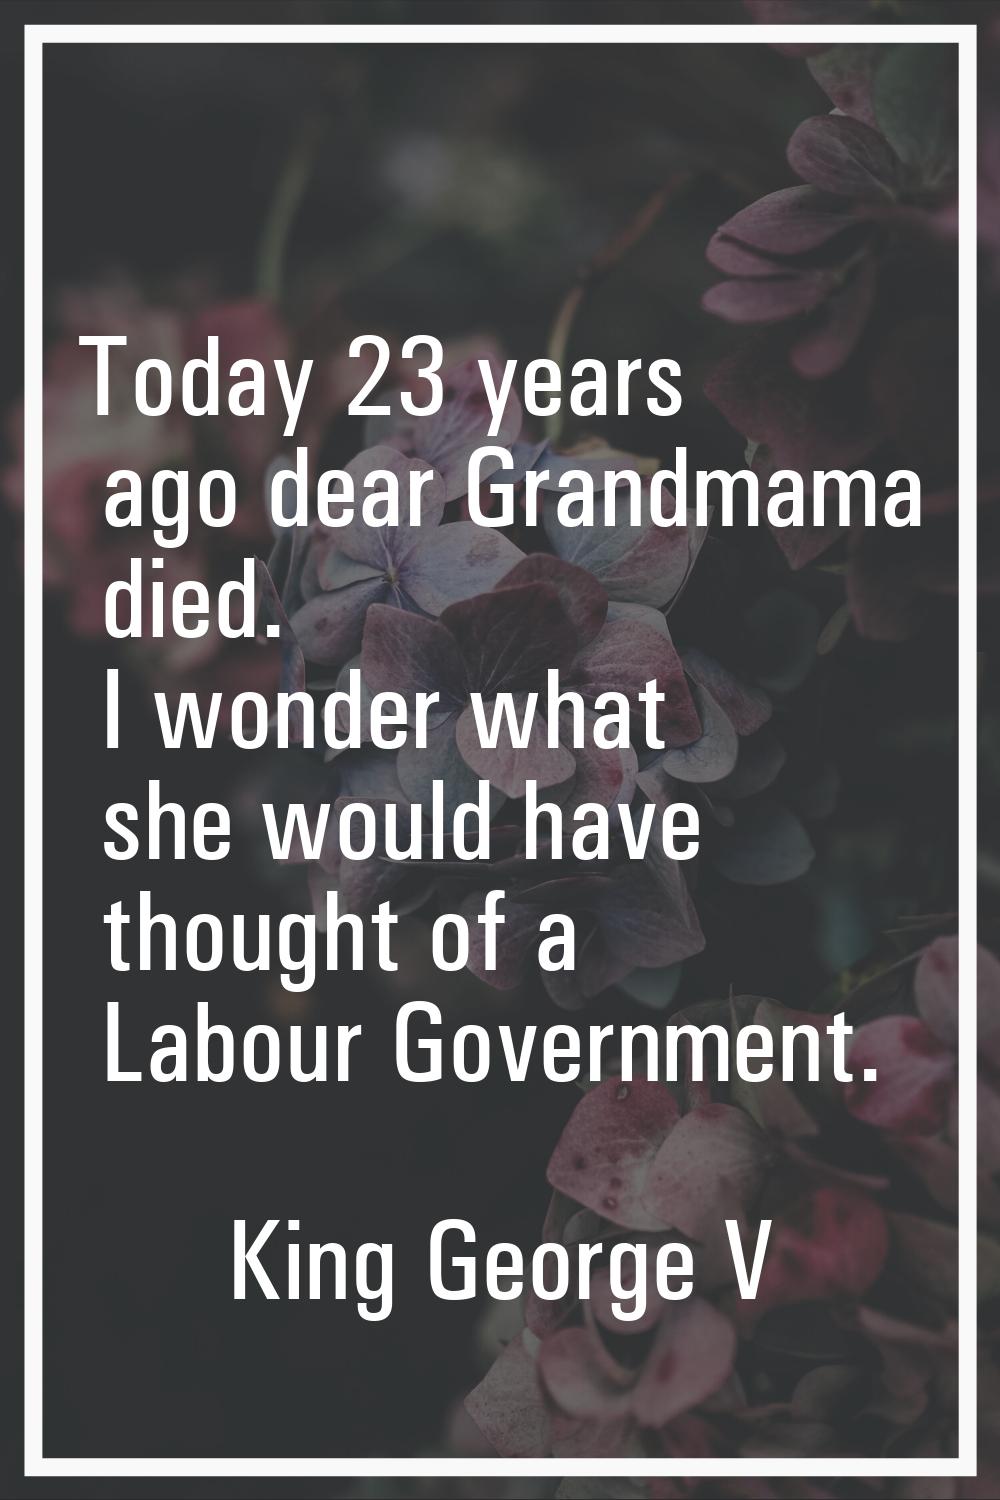 Today 23 years ago dear Grandmama died. I wonder what she would have thought of a Labour Government